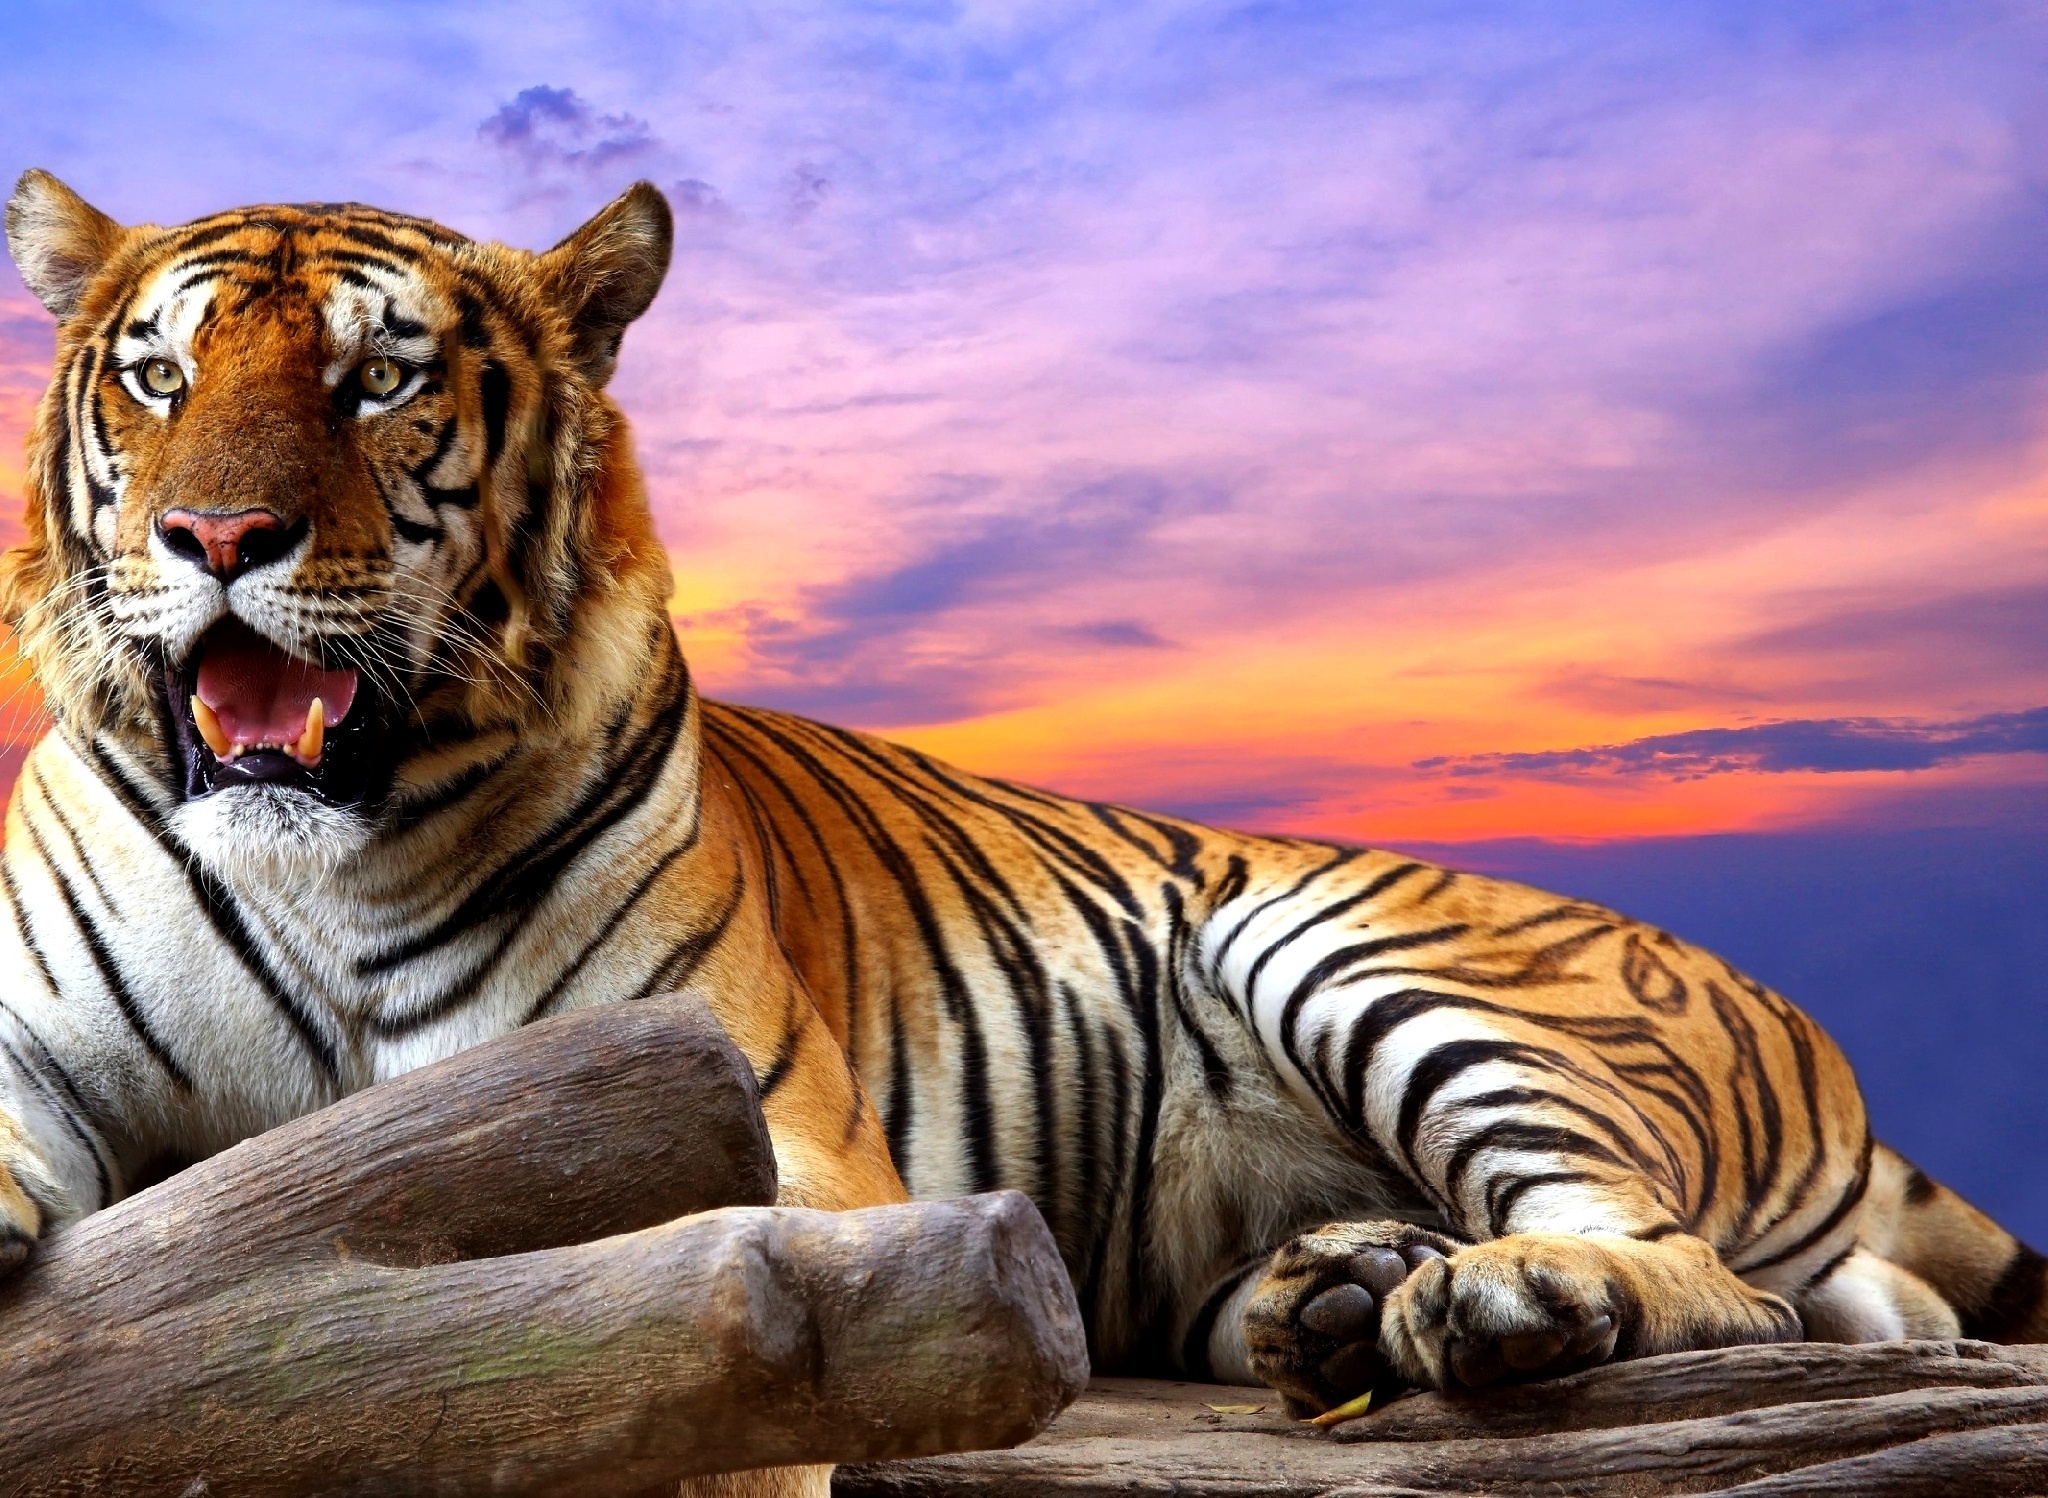 Wallpaper | Animals | photo | picture | tiger, sunset, art